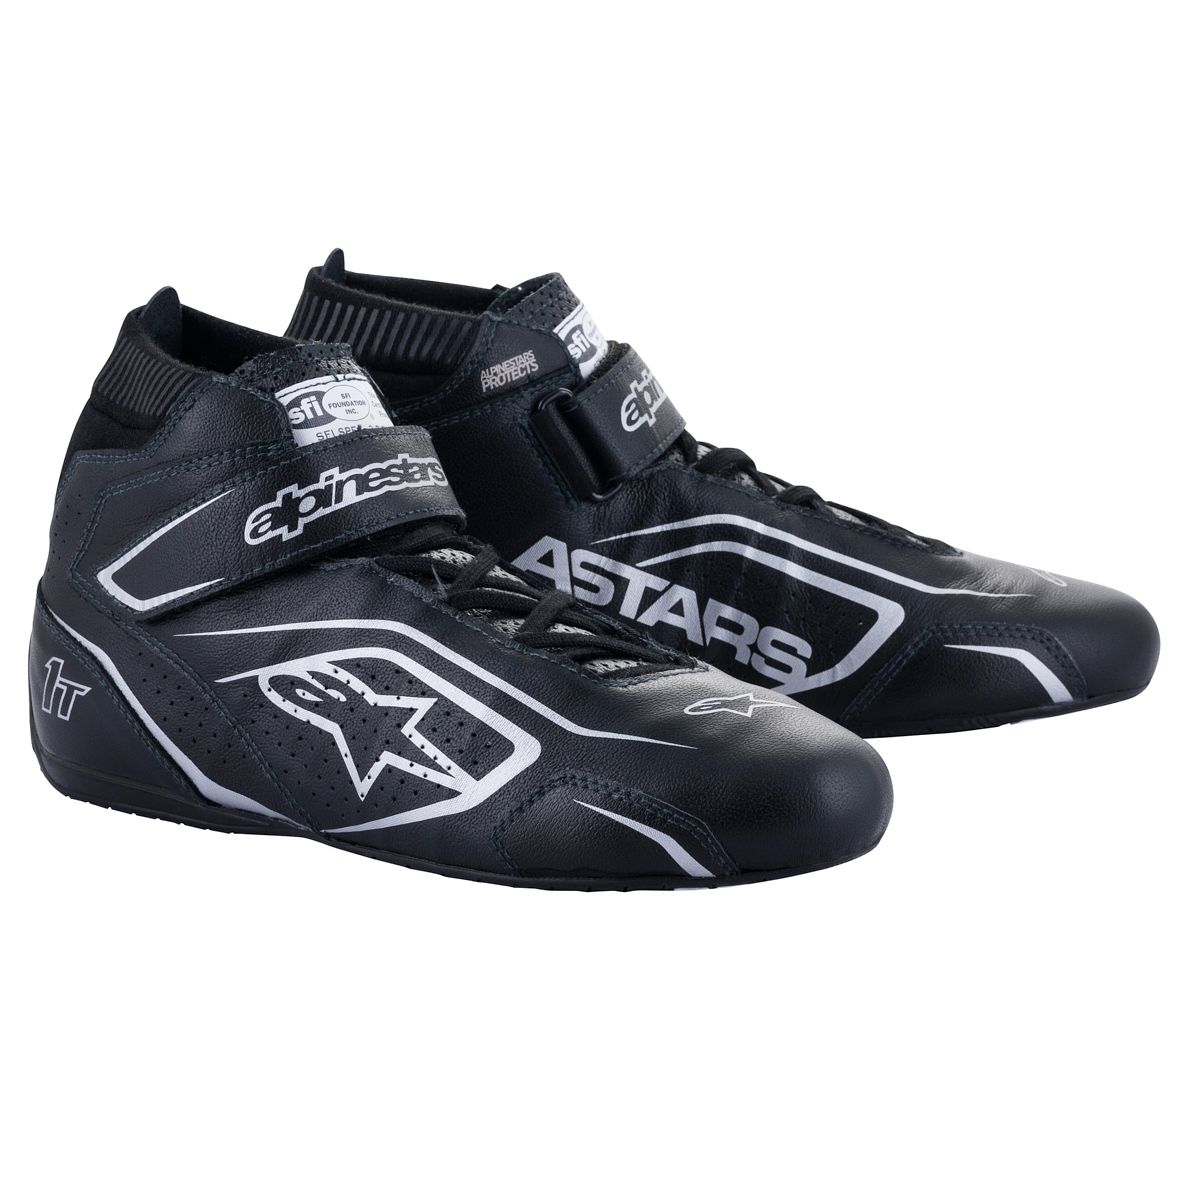 Alpinestars 2710122-119-7 Driving Shoe, Tech 1-T V3, Mid-Top, SFI 3.3, Leather Outer, Nomex Inner, Black / Silver, Size 7, Pair